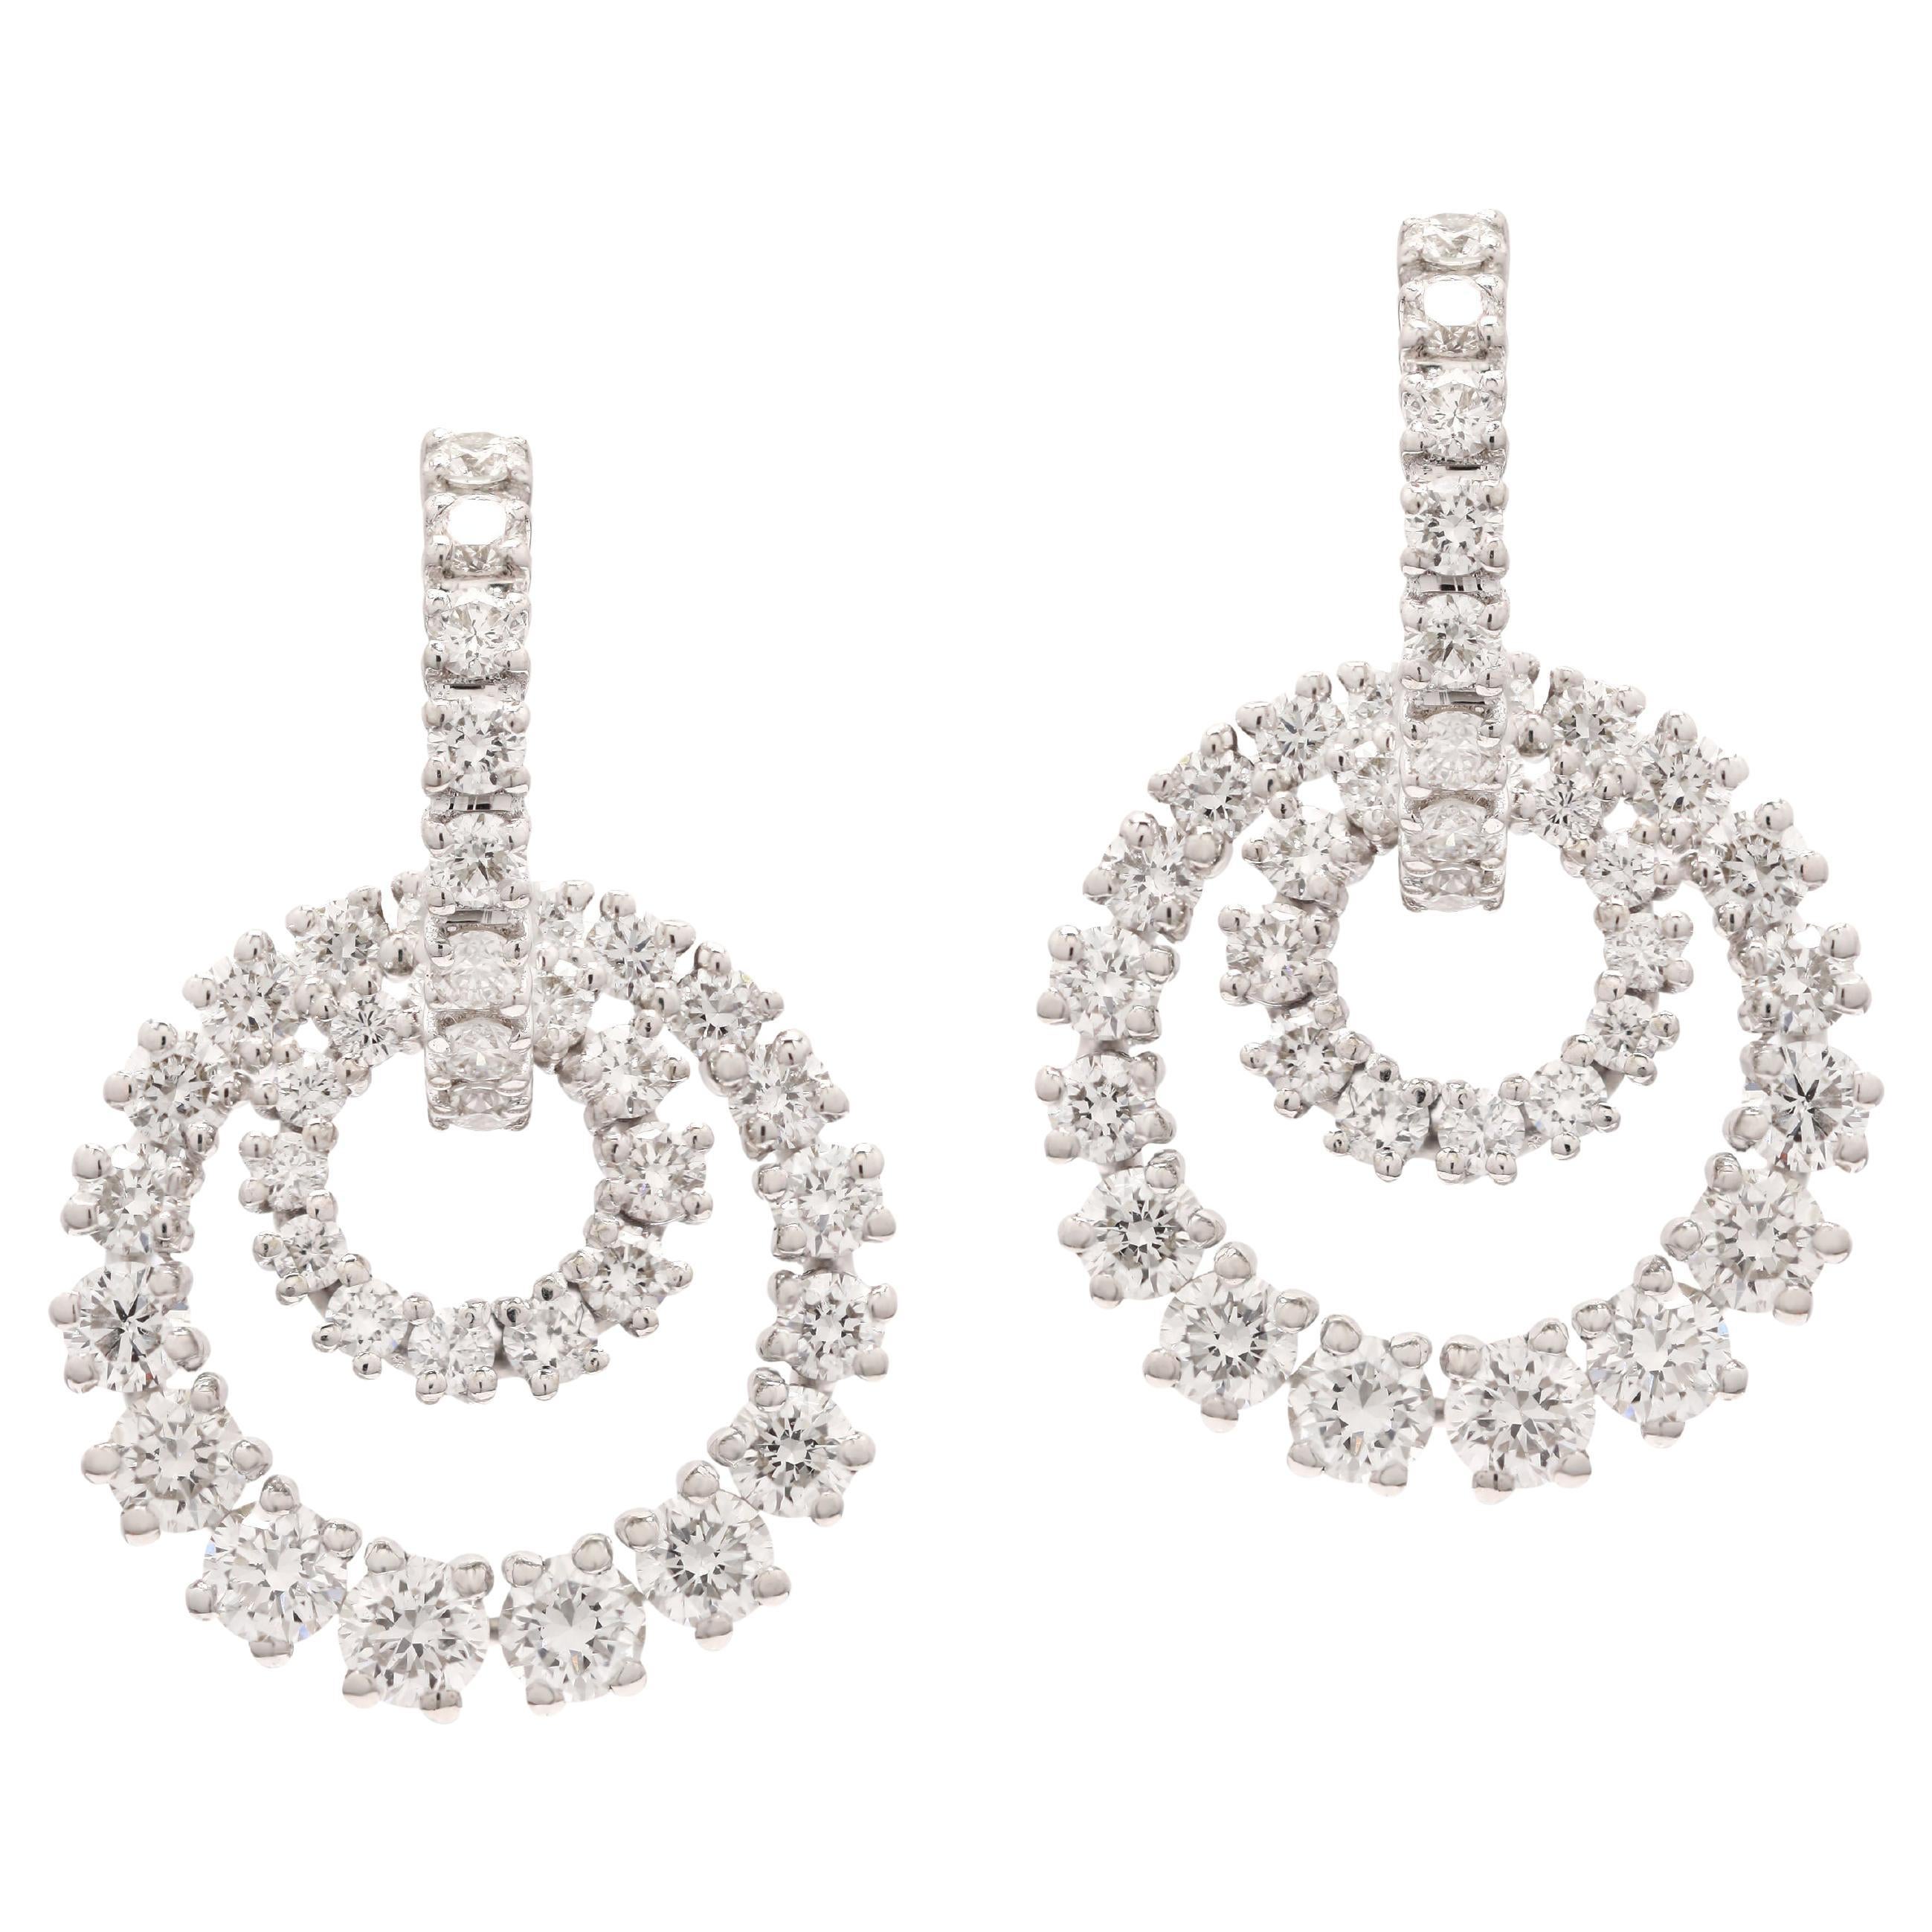 Circle Diamond Party Dangle Earrings for Women in 18K Gold to make a statement with your look. You shall need dangle earrings to make a statement with your look. These earrings create a sparkling, luxurious look featuring round cut diamonds .
April